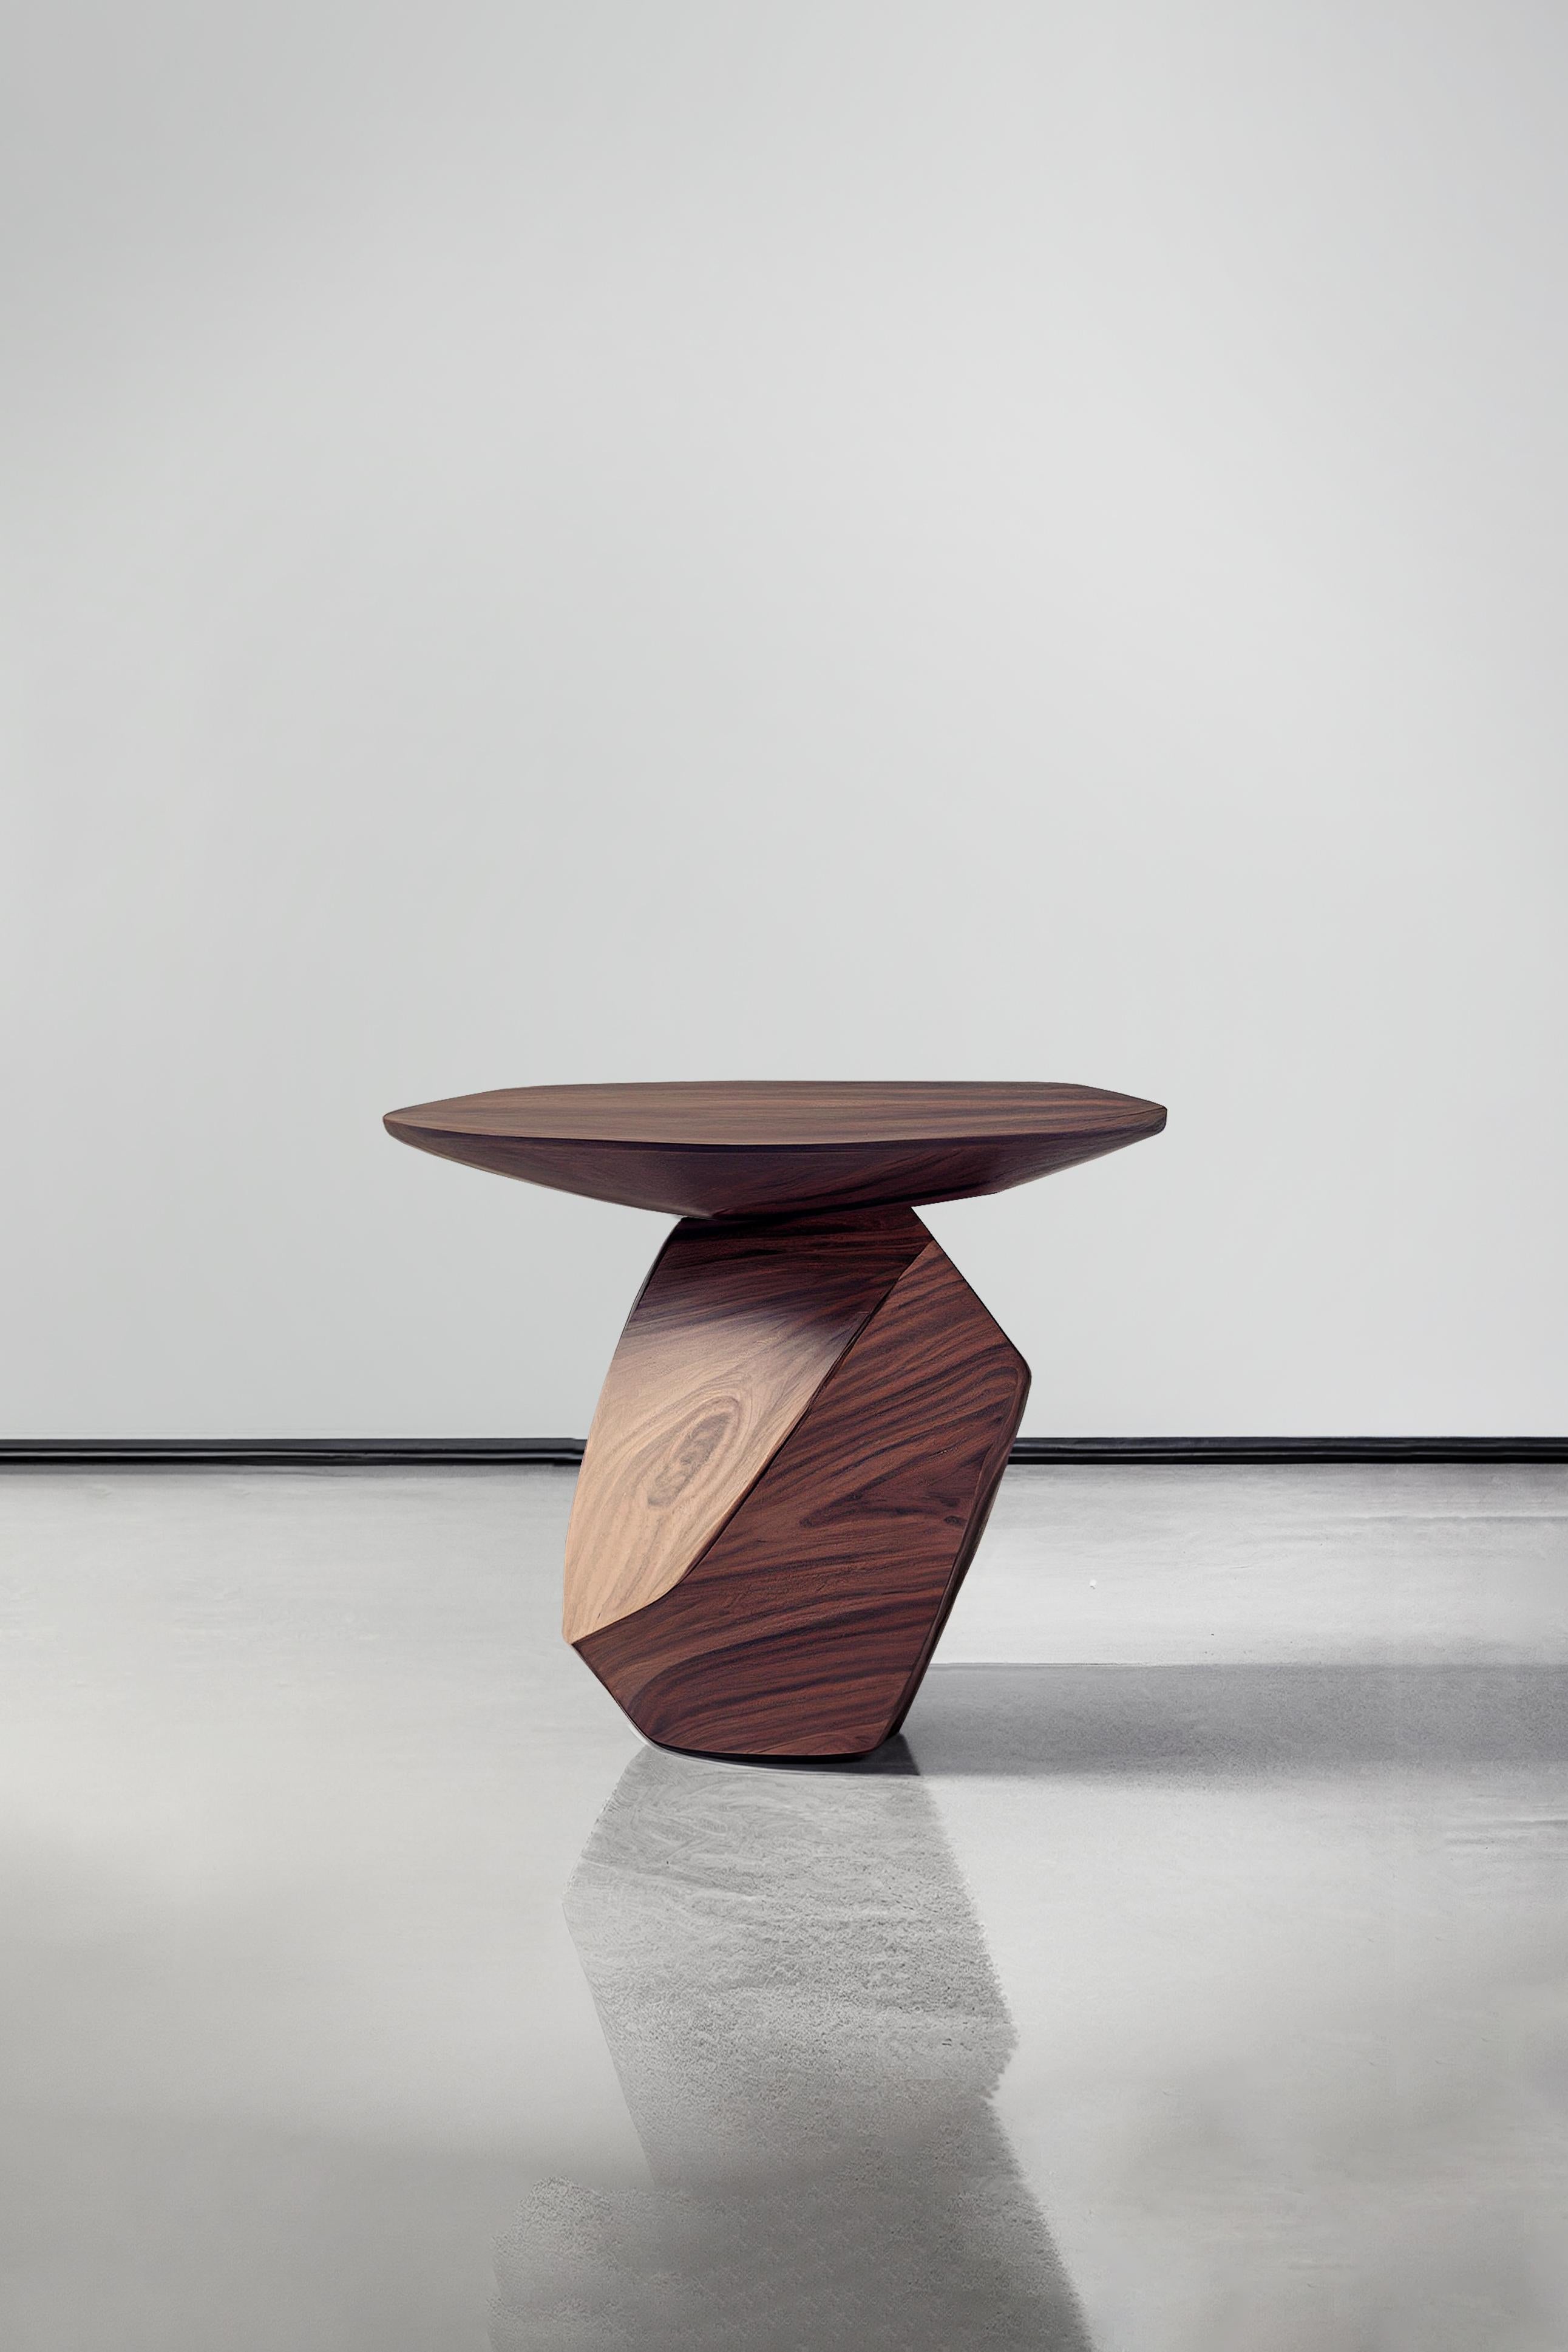 Mexican Artful Design Solace 3: Solid Walnut Auxiliary Table with Unique Wood Grain For Sale